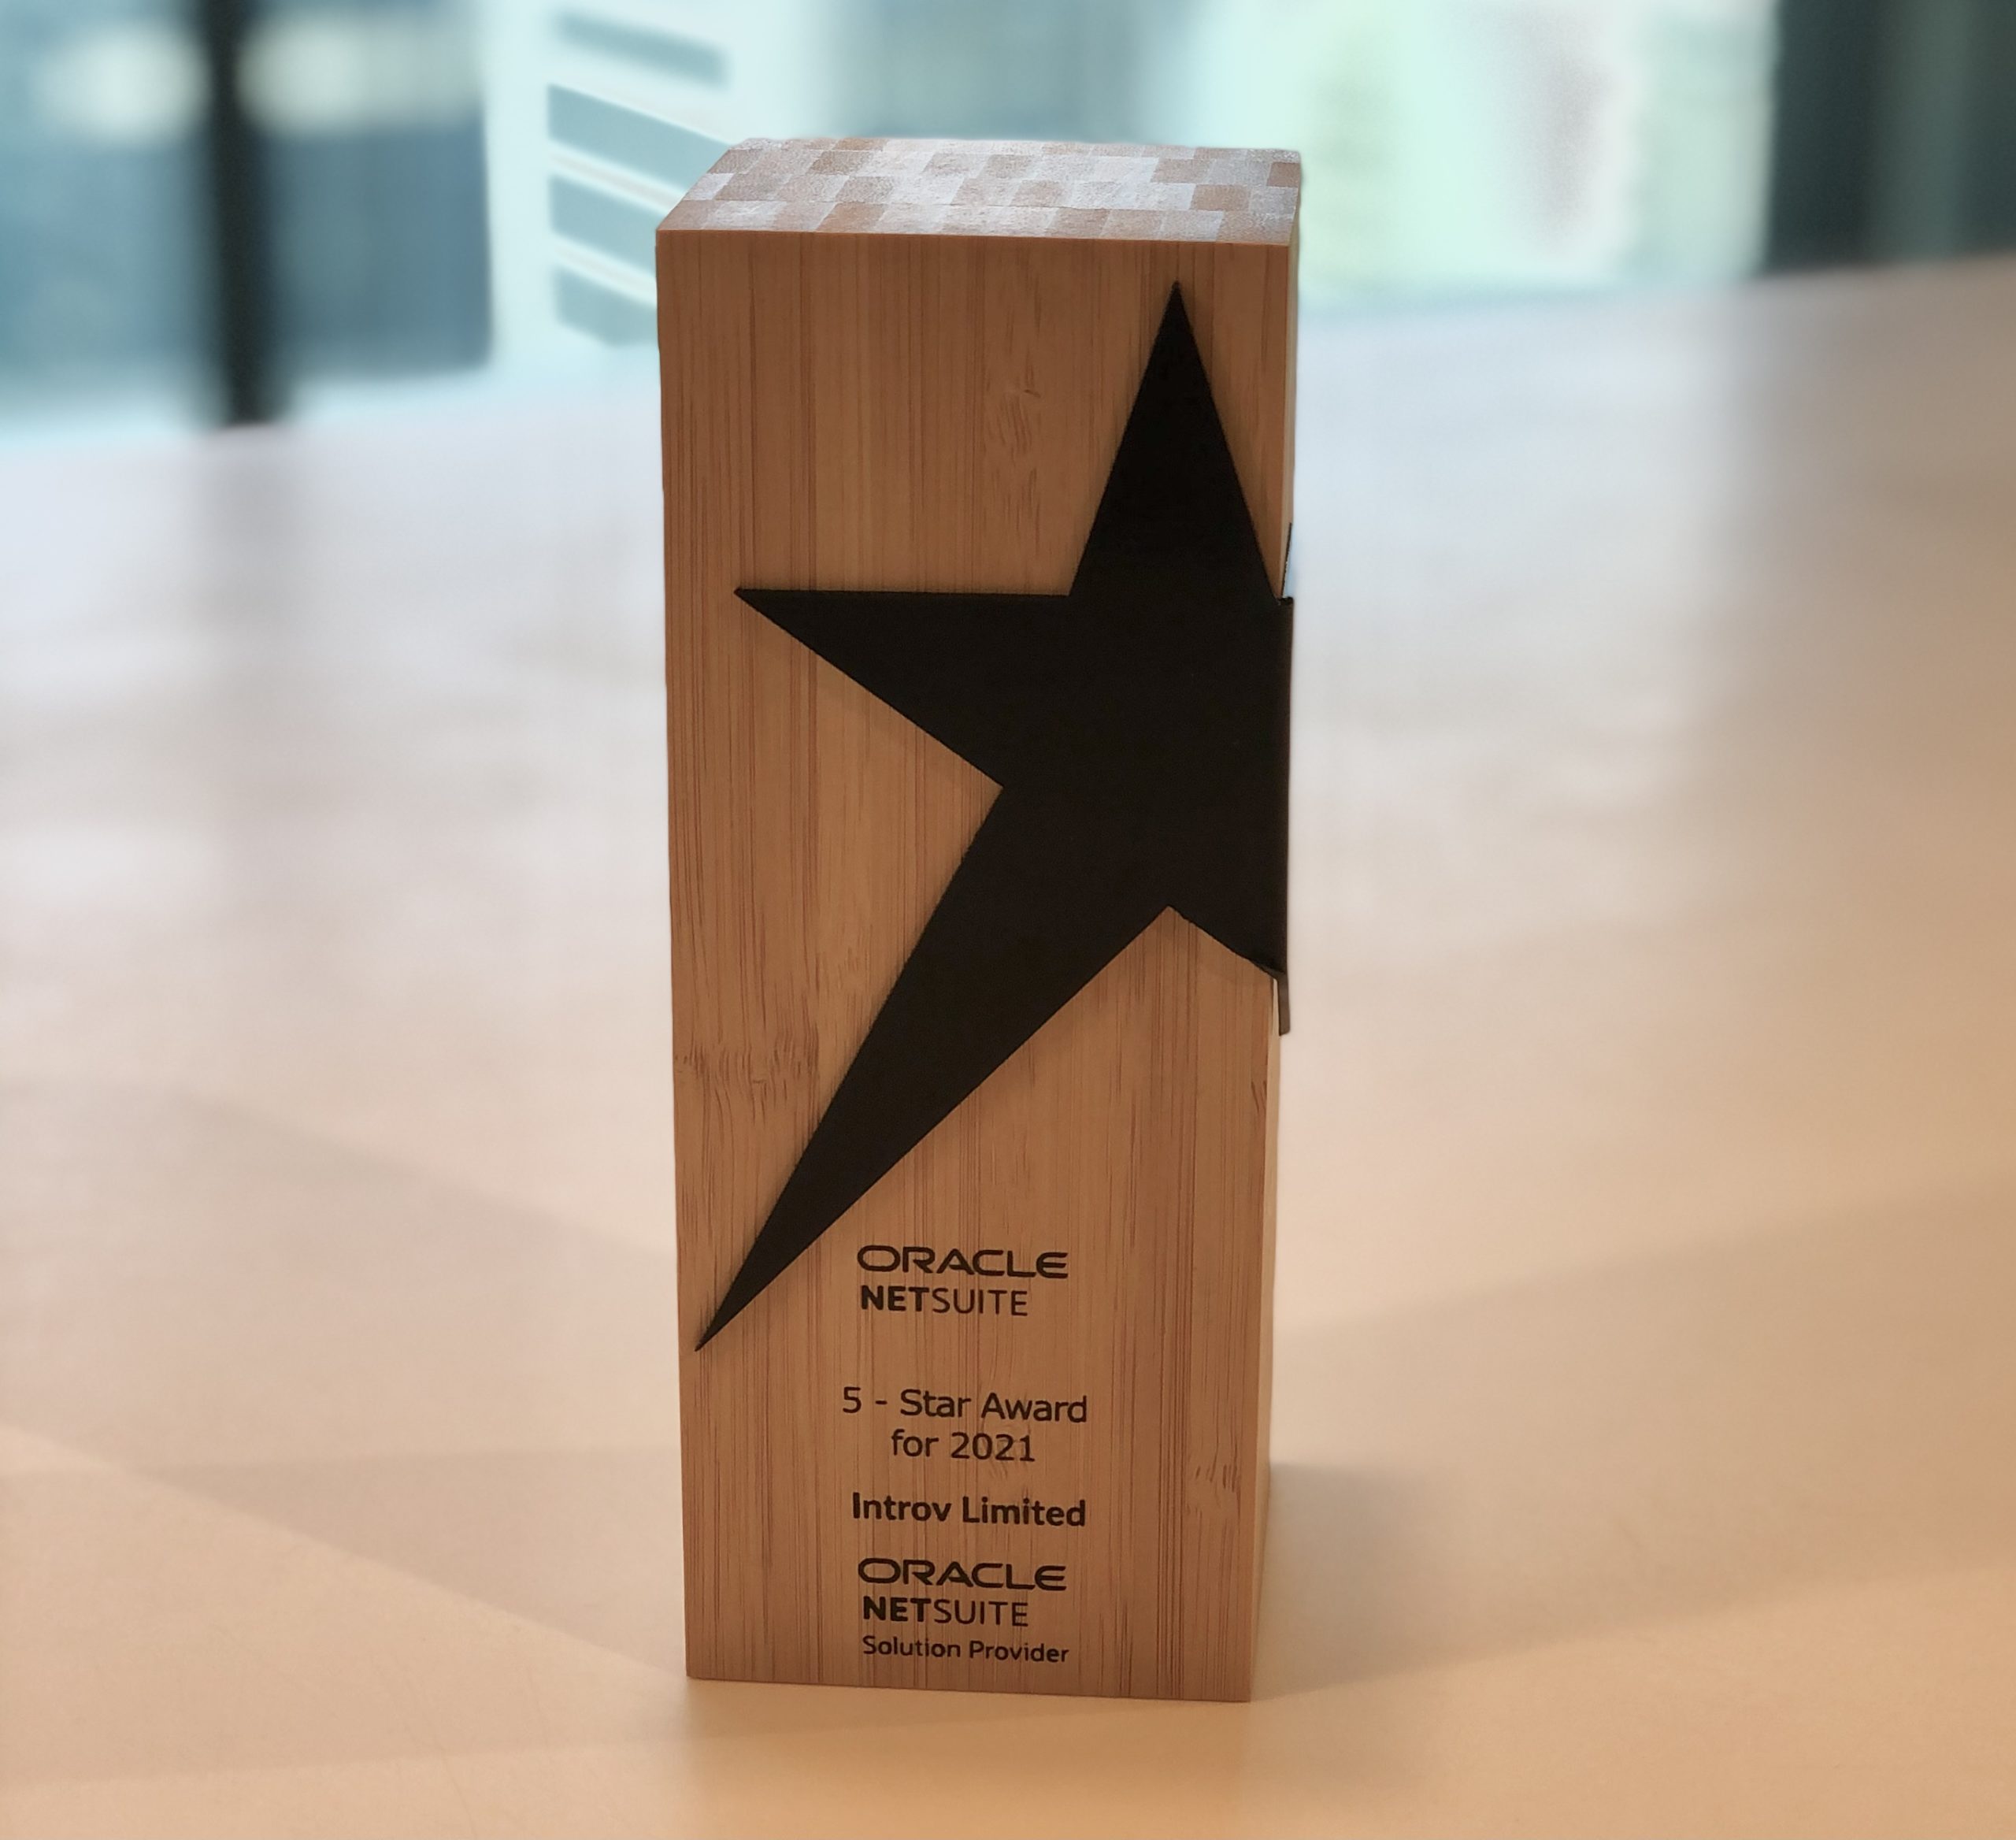 Introv gained Oracle NetSuite “5-Star Award” for 4 Consecutive Years (2018-2021)